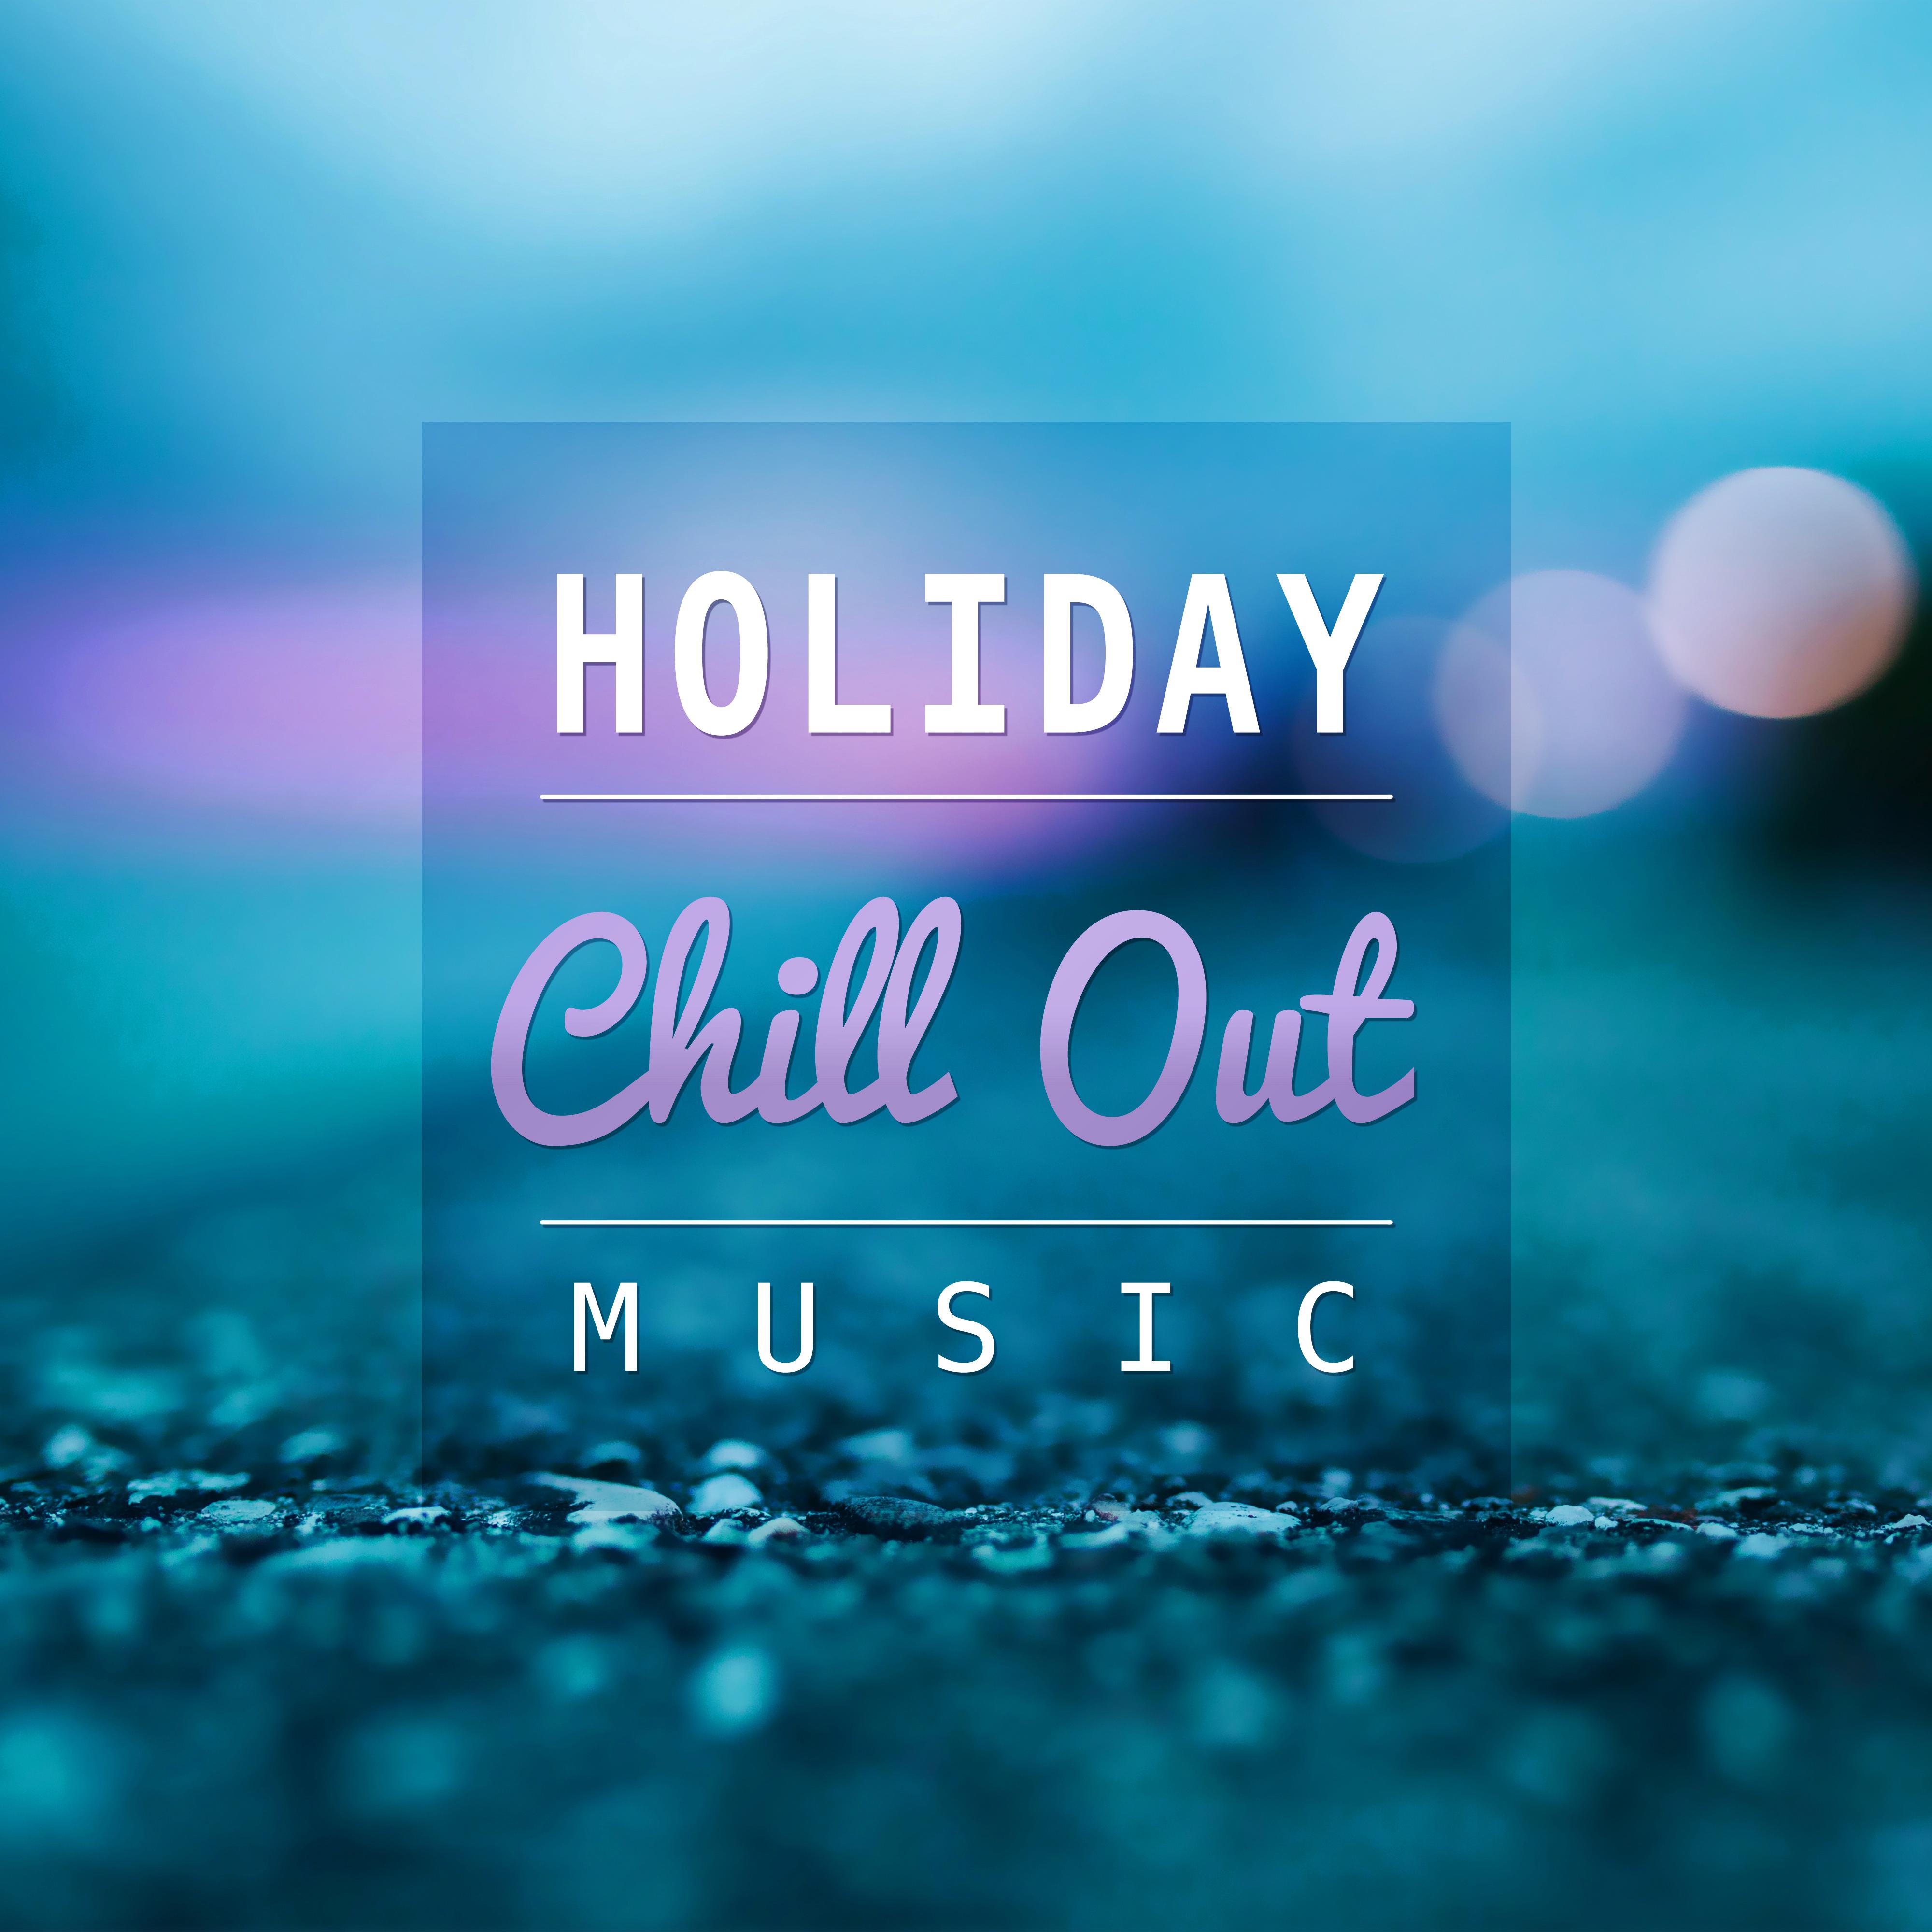 Holiday Chill Out Music – Take a Chill, Peacefull Music, Beach Relaxation, Tropical Island